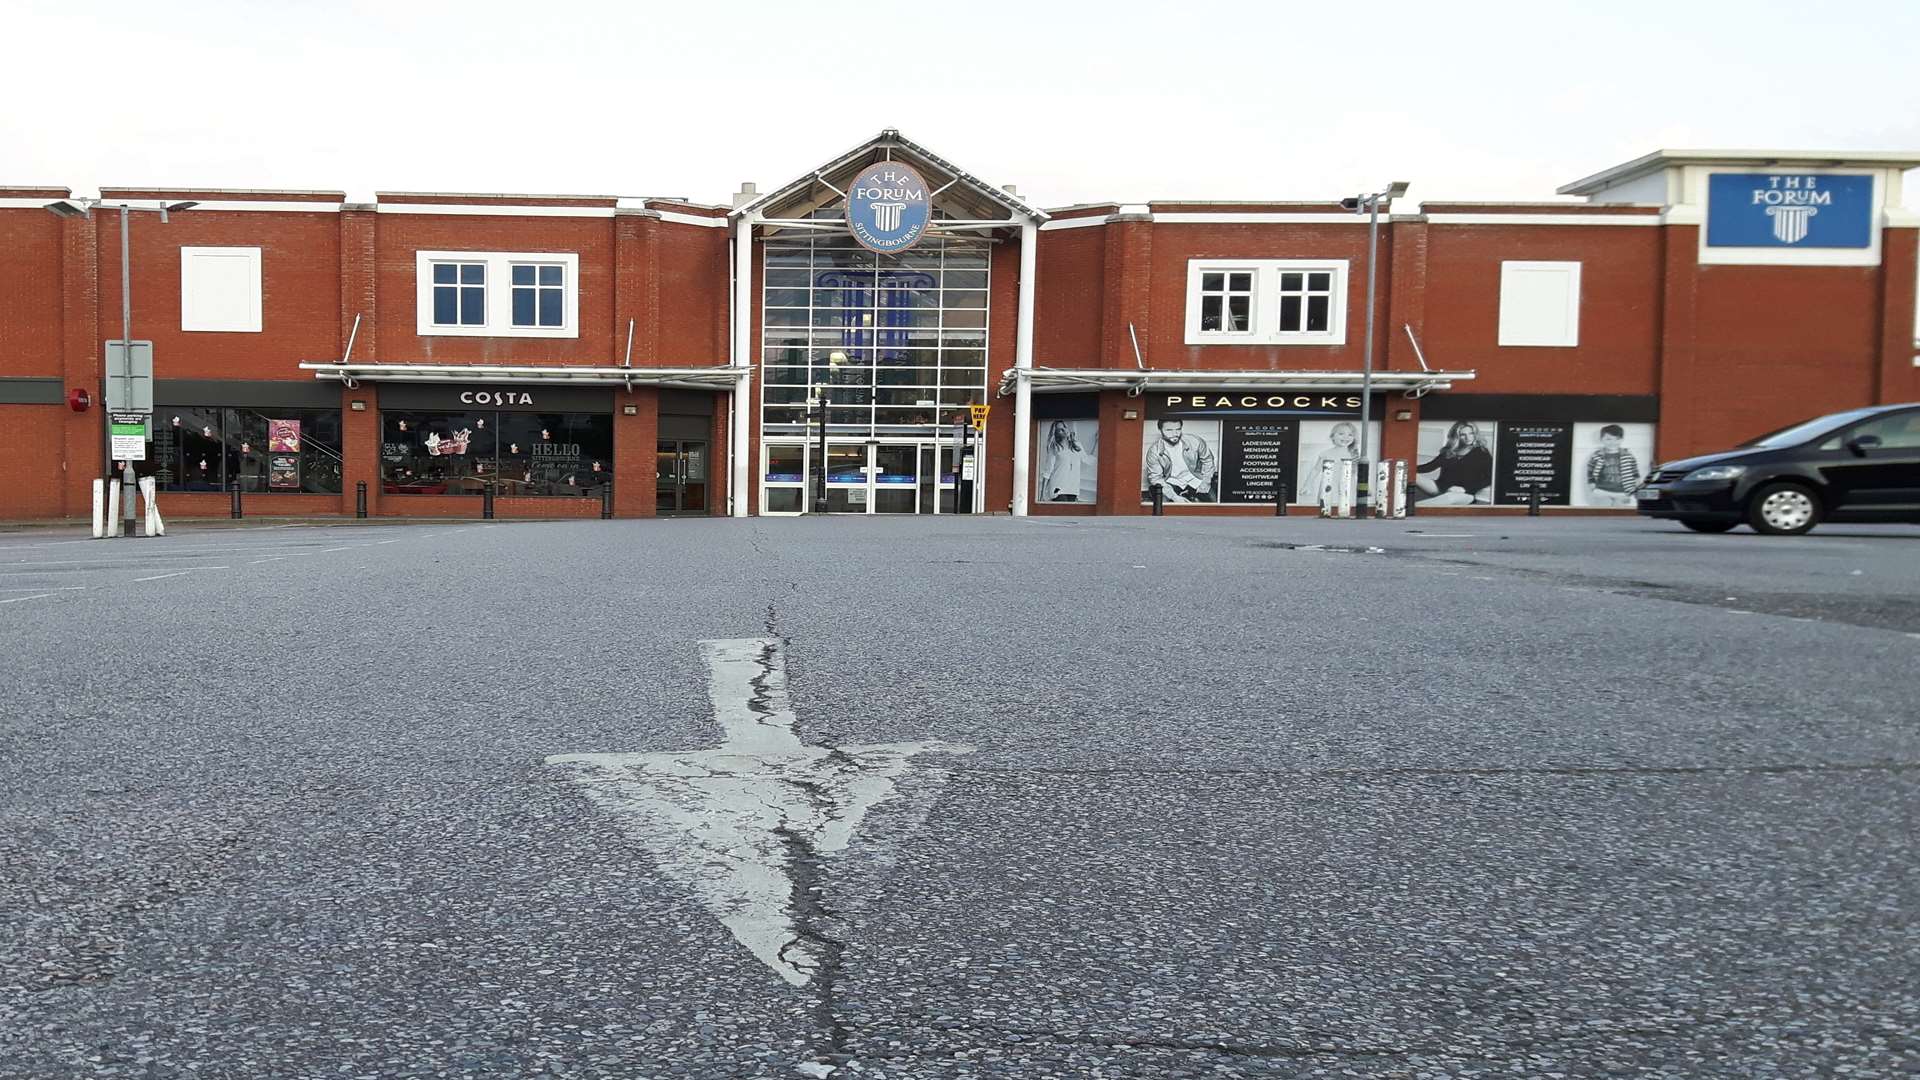 The Forum Centre car park is to host an outdoor cinema screening